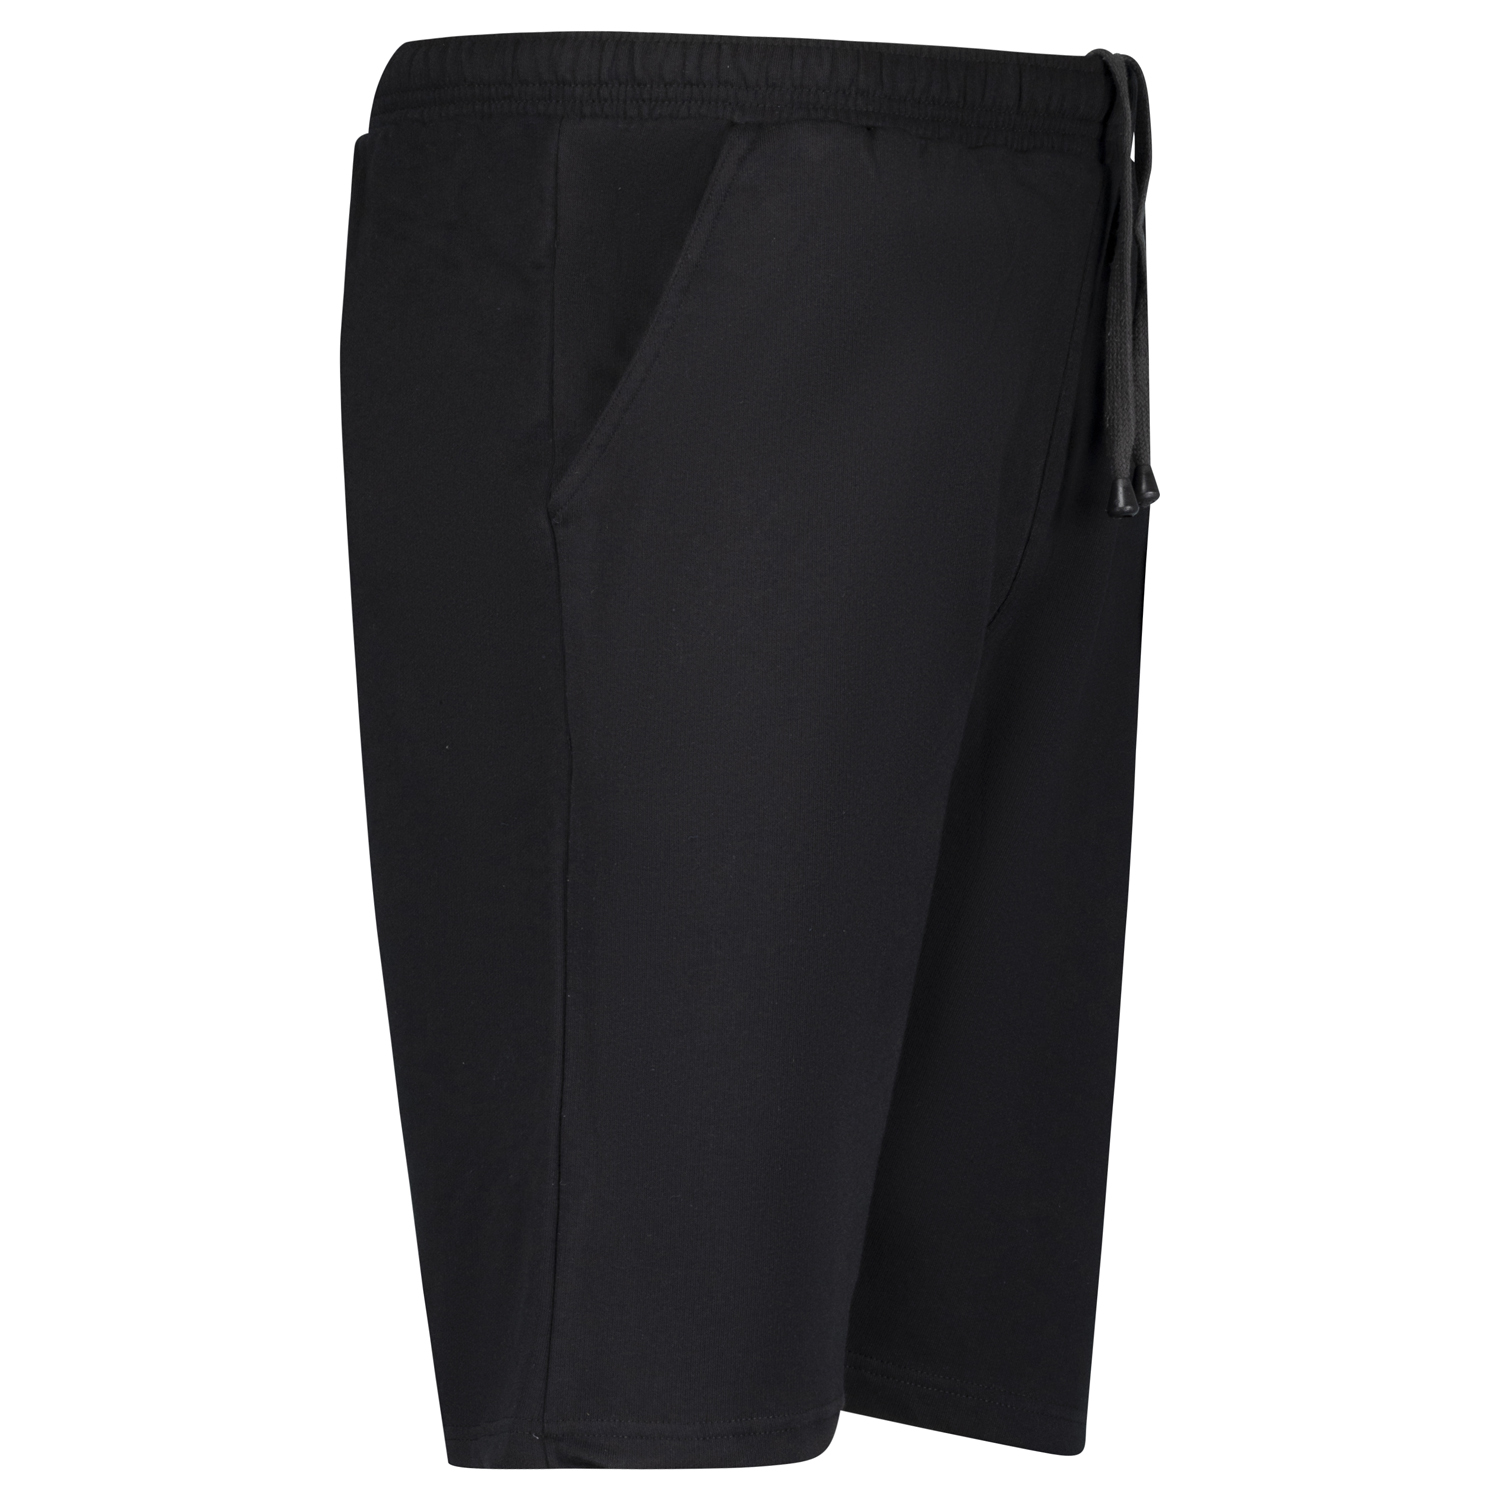 Black short jogging trousers up to 14XL by Adamo